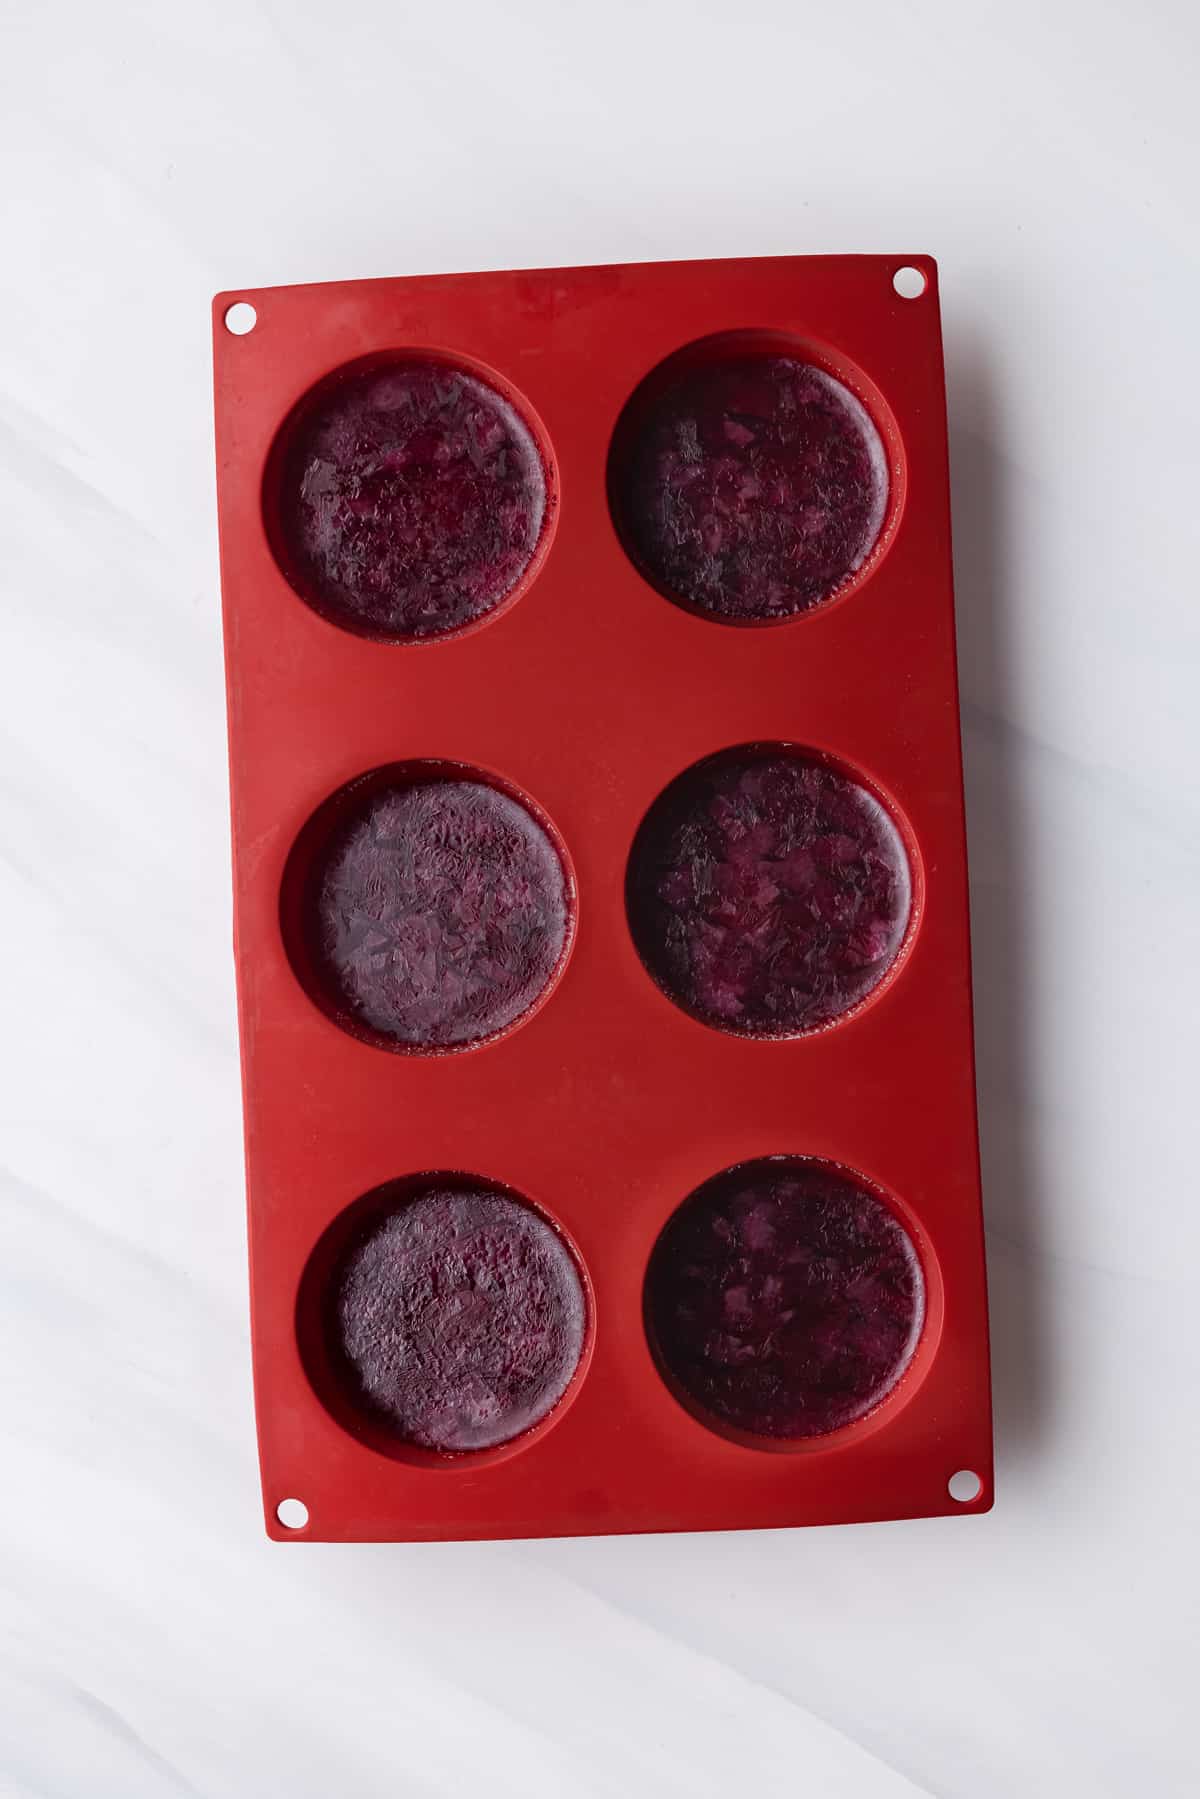 Frozen pomegranate juice in red dome molds.